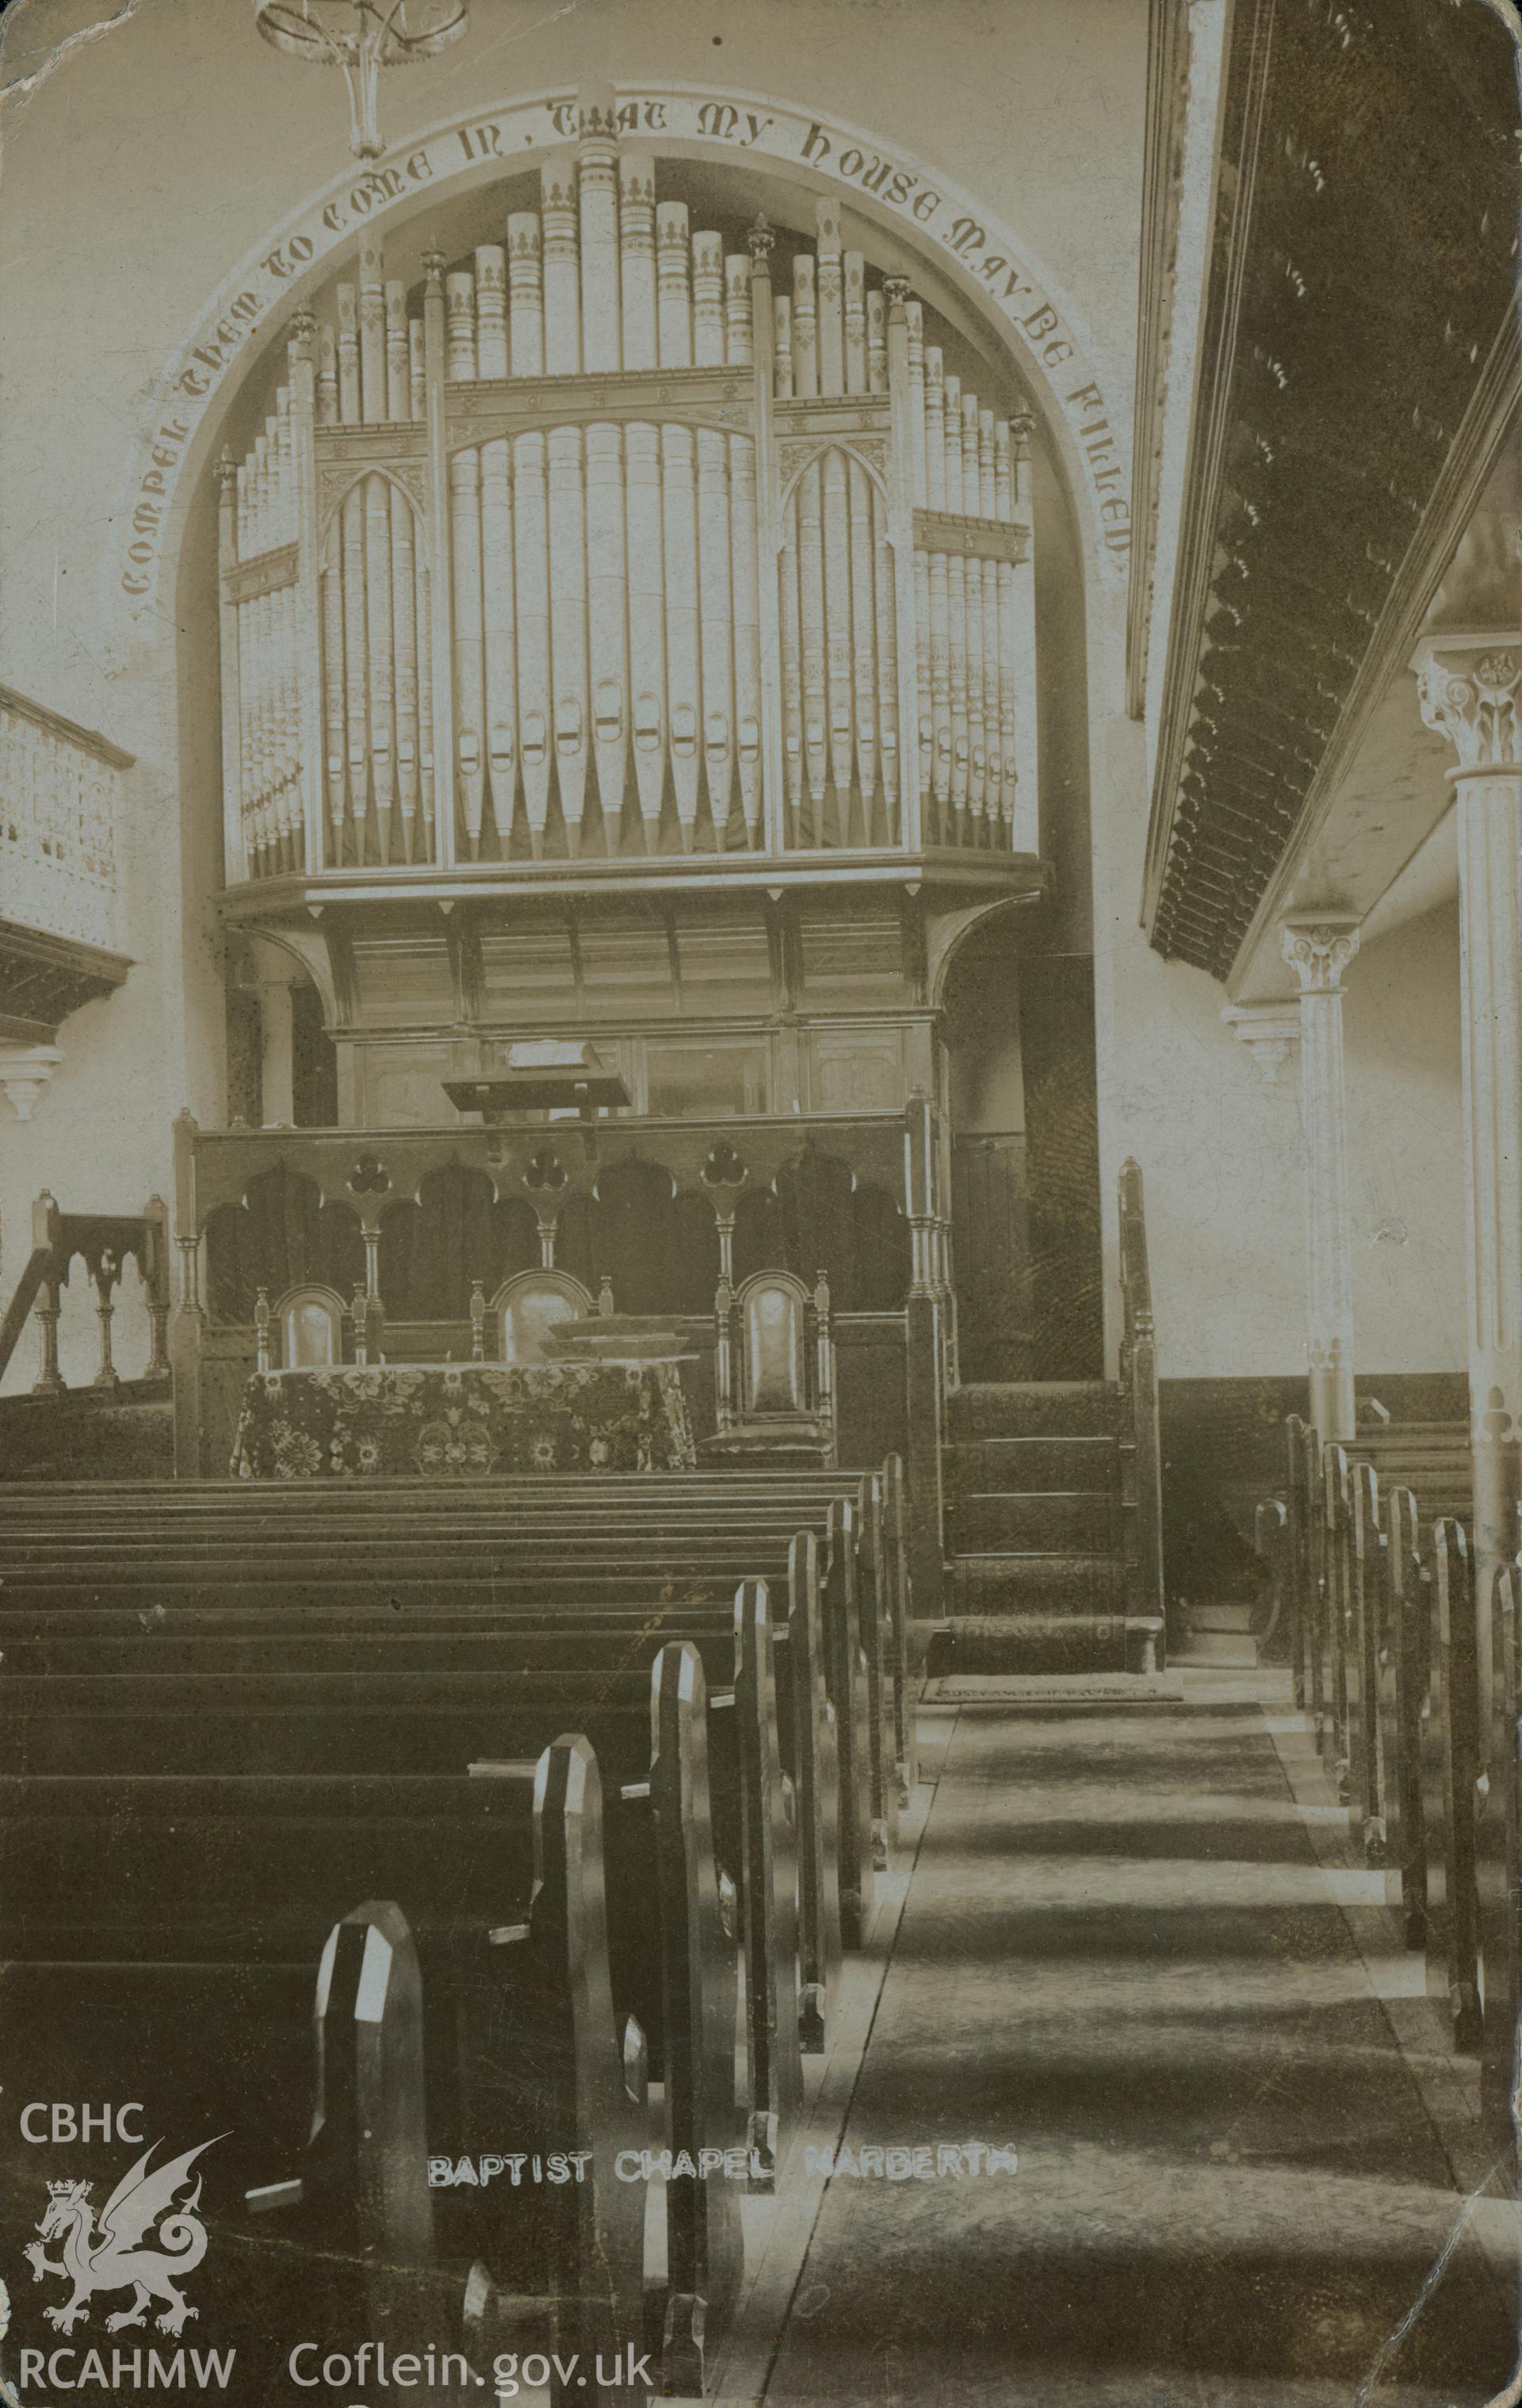 Digital copy of monochrome postcard showing interior view looking towards the organ at Bethesda English Baptist chapel on Narberth high street. Loaned for copying by Thomas Lloyd.